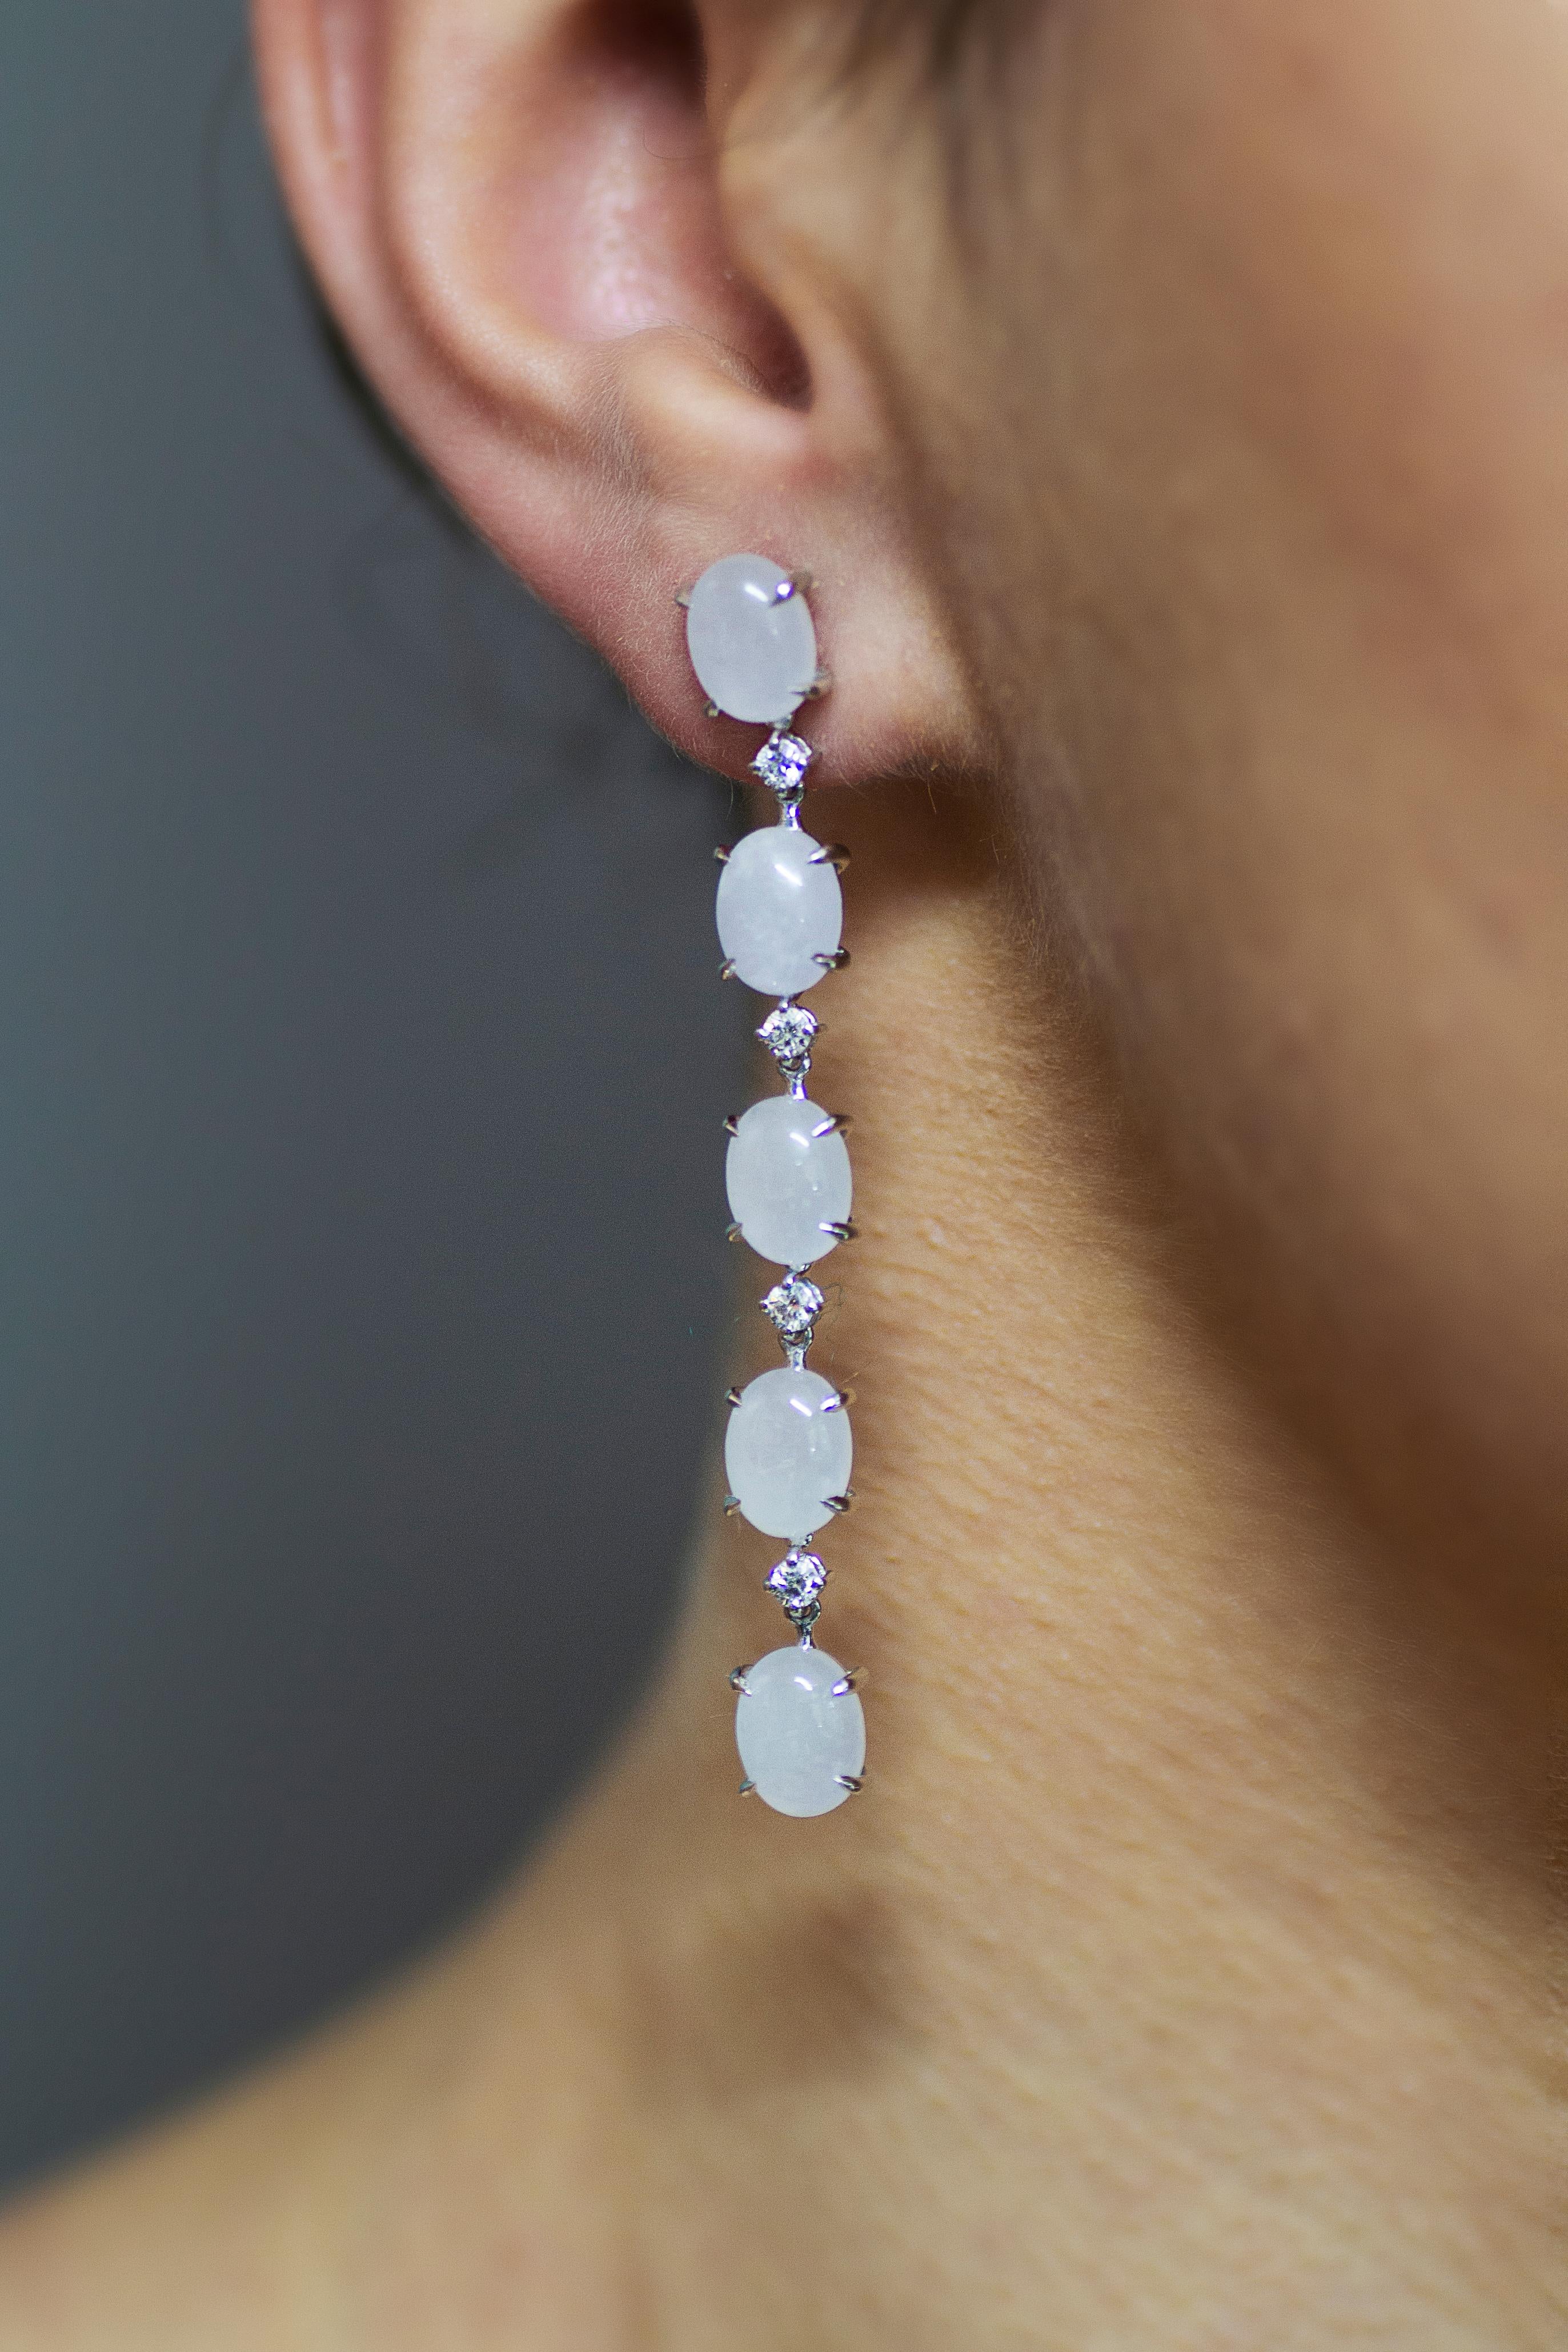 Exquisite design handcrafted in Italy, in Margherita Burgener family workshop.
This elegant  pair of earrings is a very refined combination of a light grey hues jade and  white diamonds.

18 KT white gold grams 6.52
n.8 diamonds for total carat